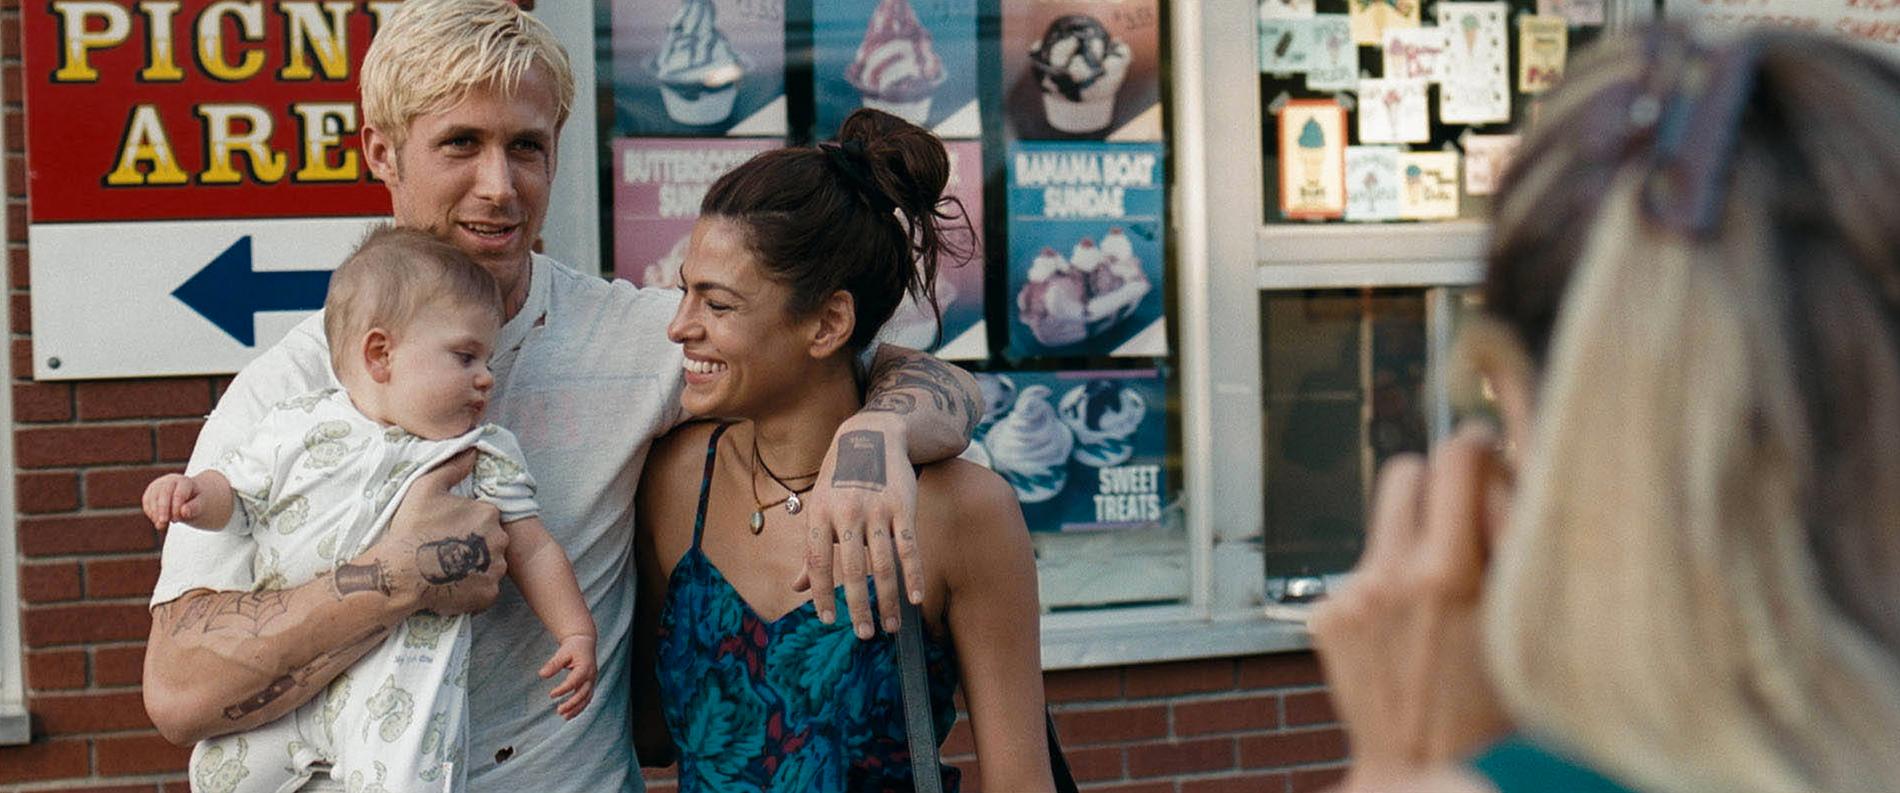 ”The place beyond the pines” med bland andra Ryan Gosling och Eva Mendes.